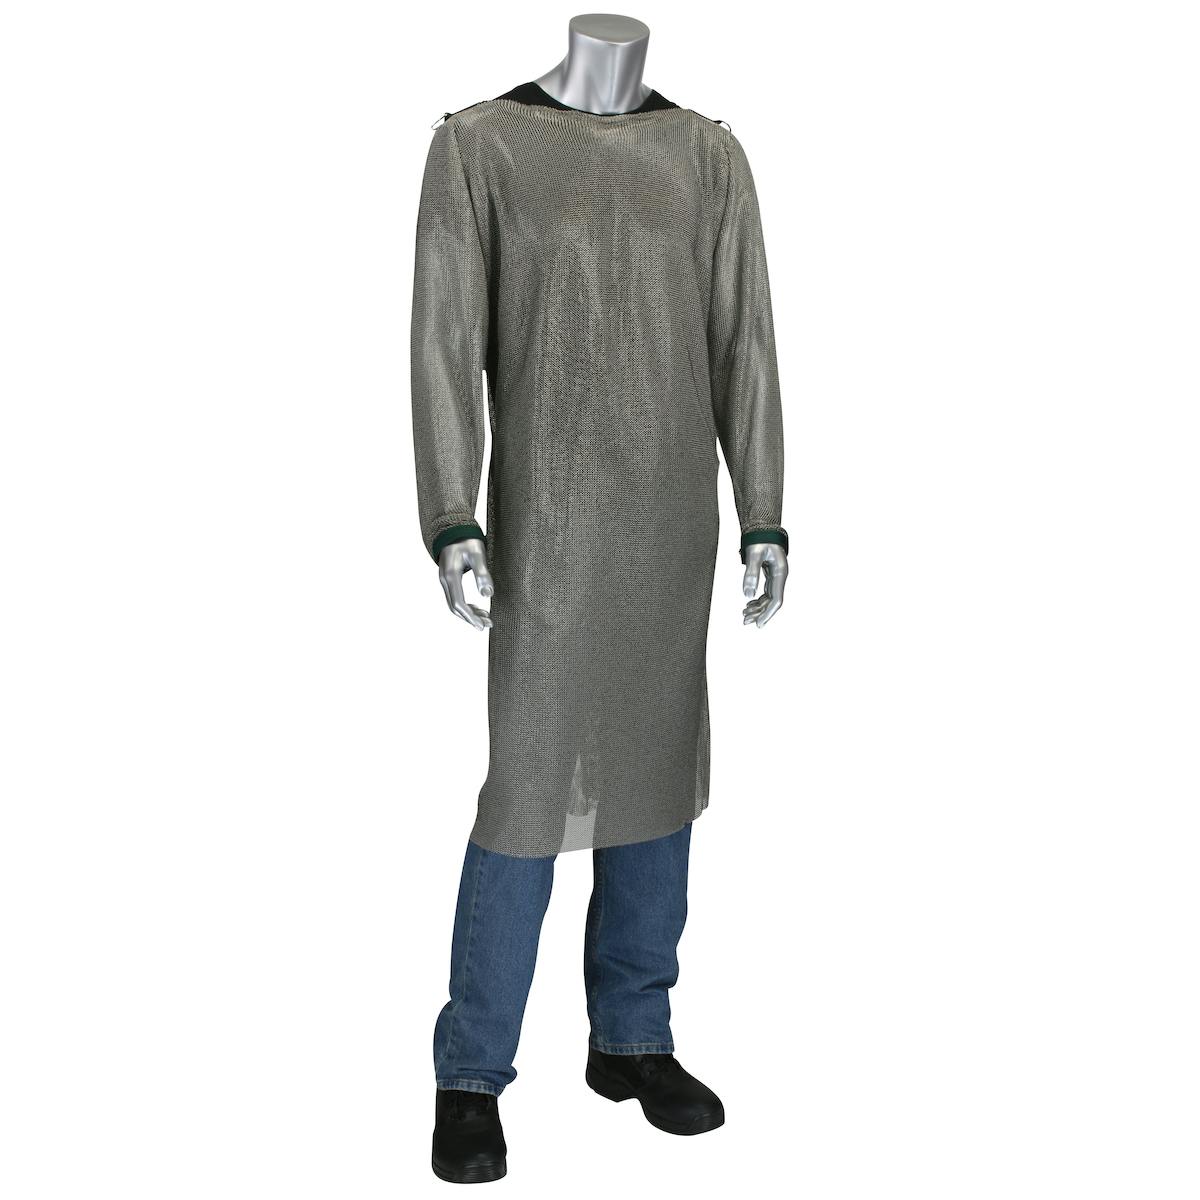 Stainless Steel Mesh Full Body Tunic with Sleeves, Silver (USM-4300L)_1